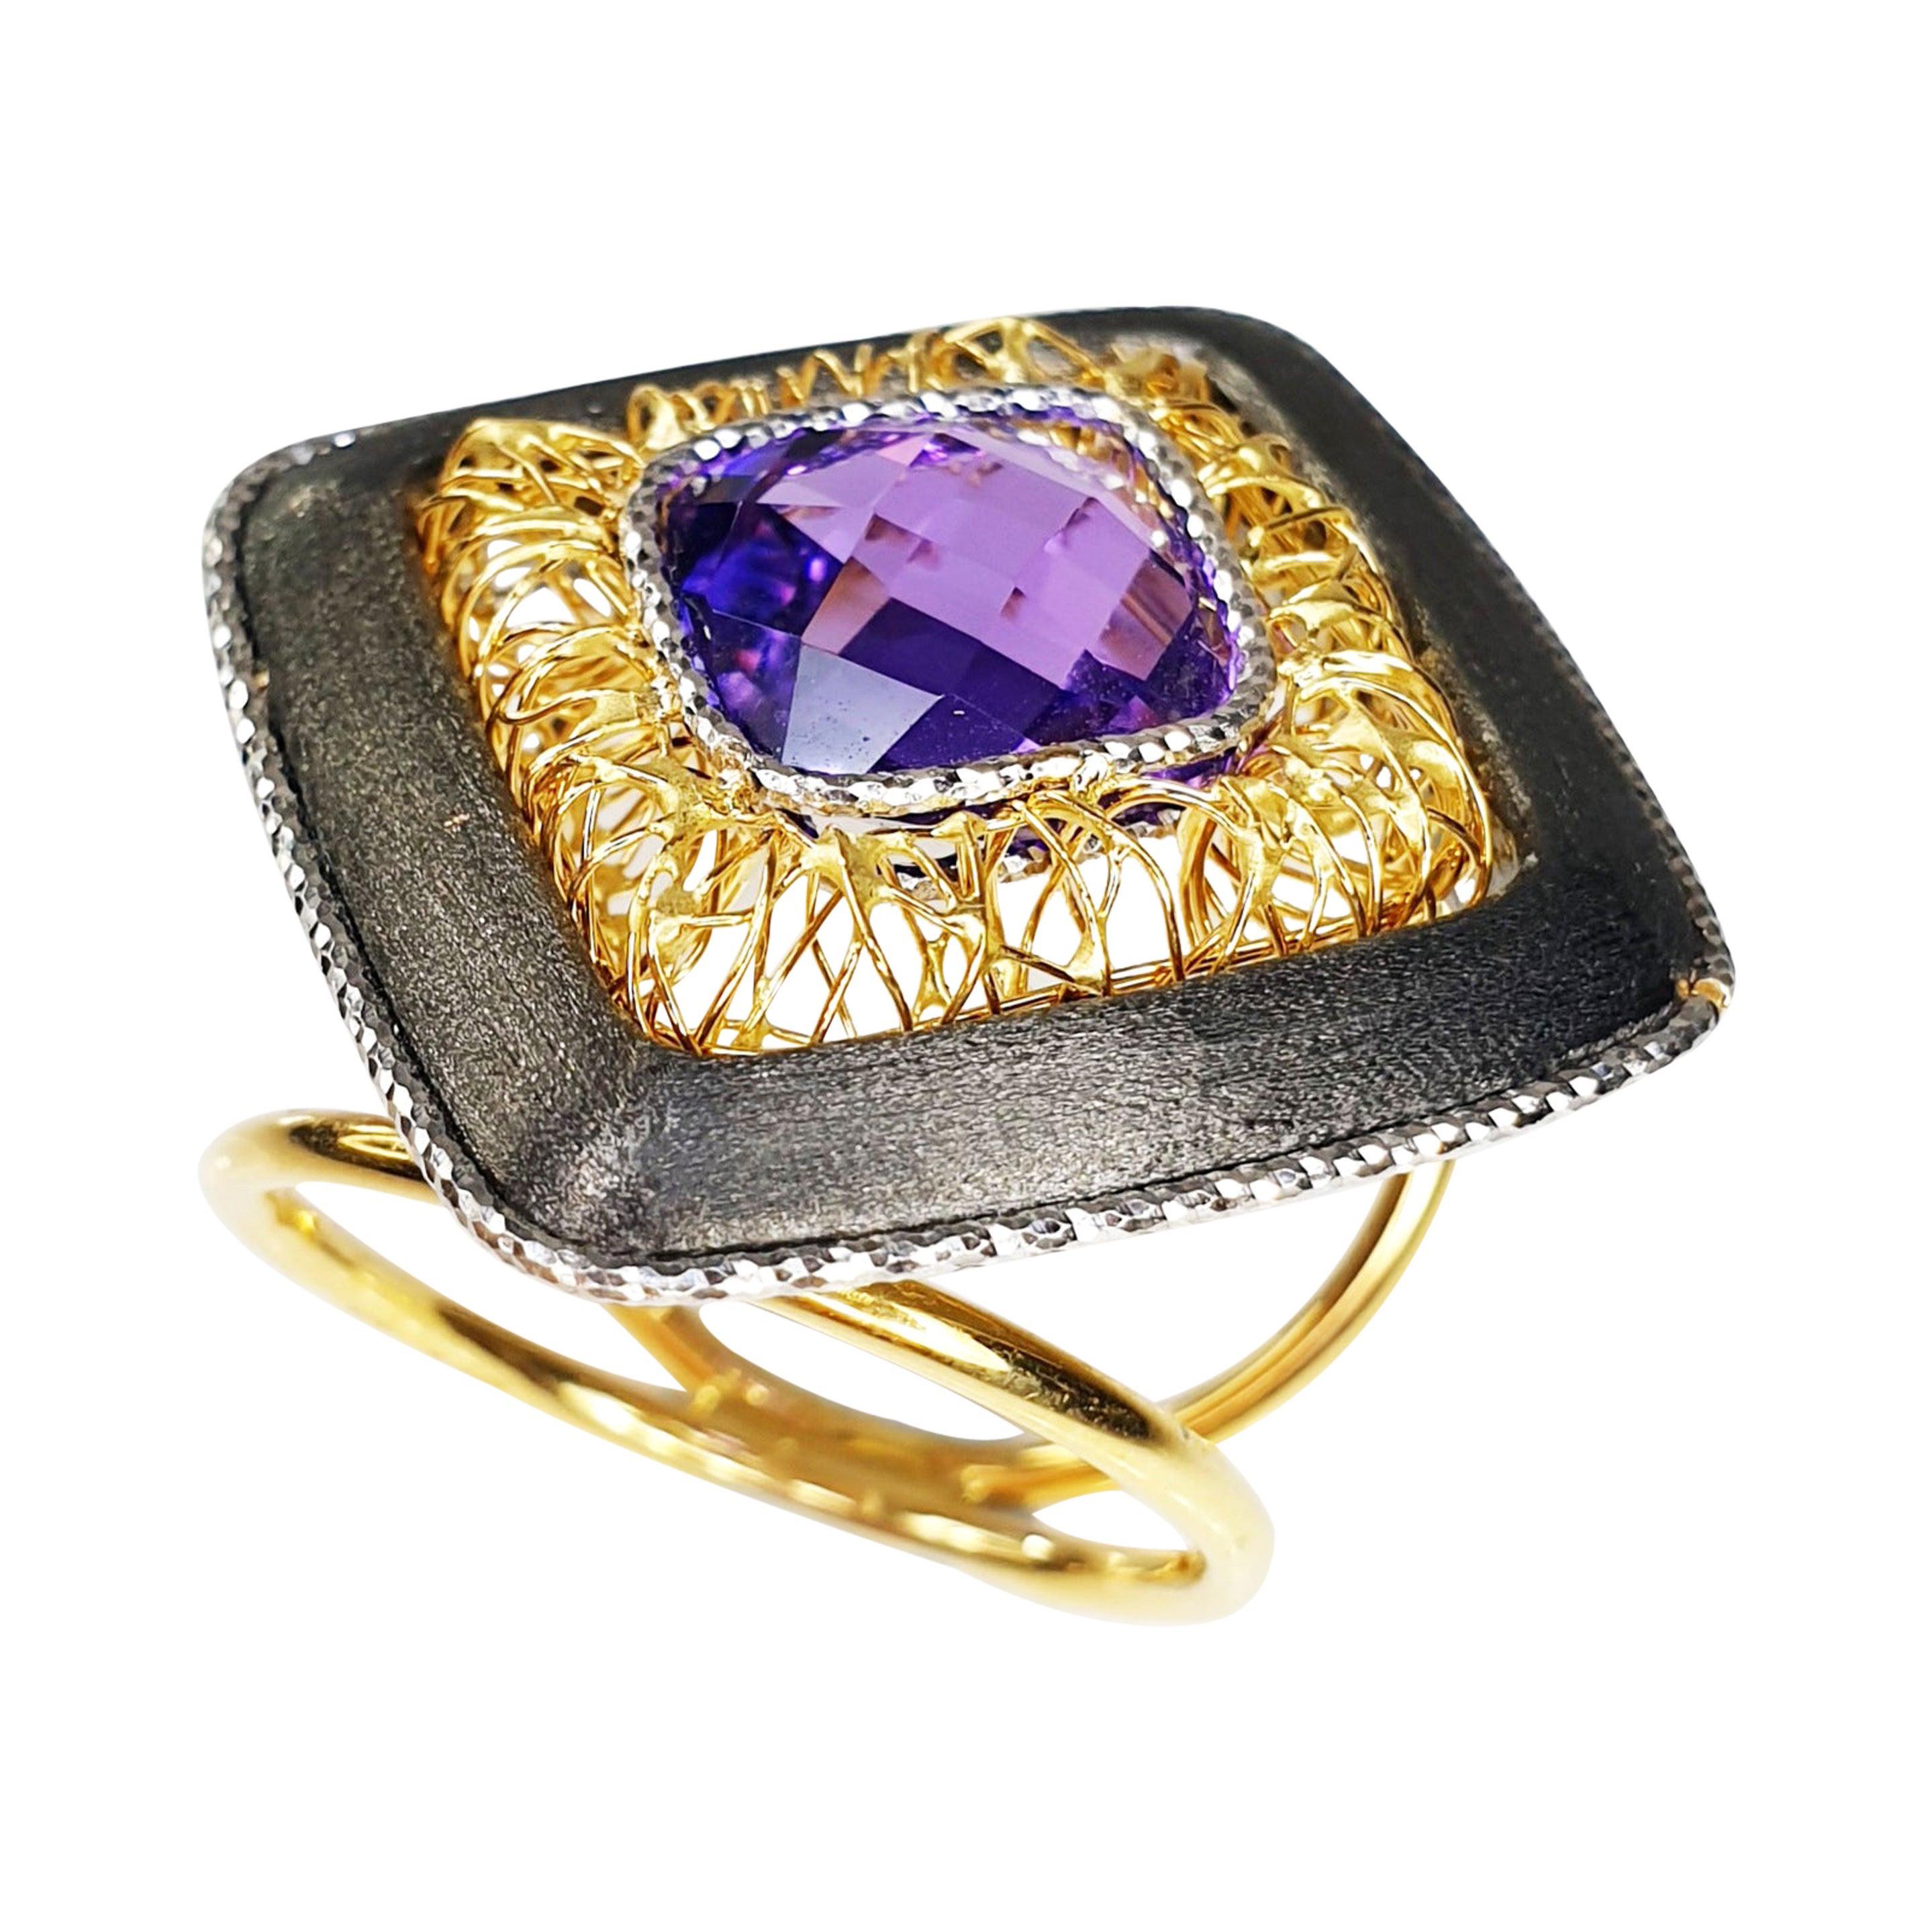 For Sale:  Multifaceted Amethyst in Titatium and 18 Karat White and Yellow Gold Ring